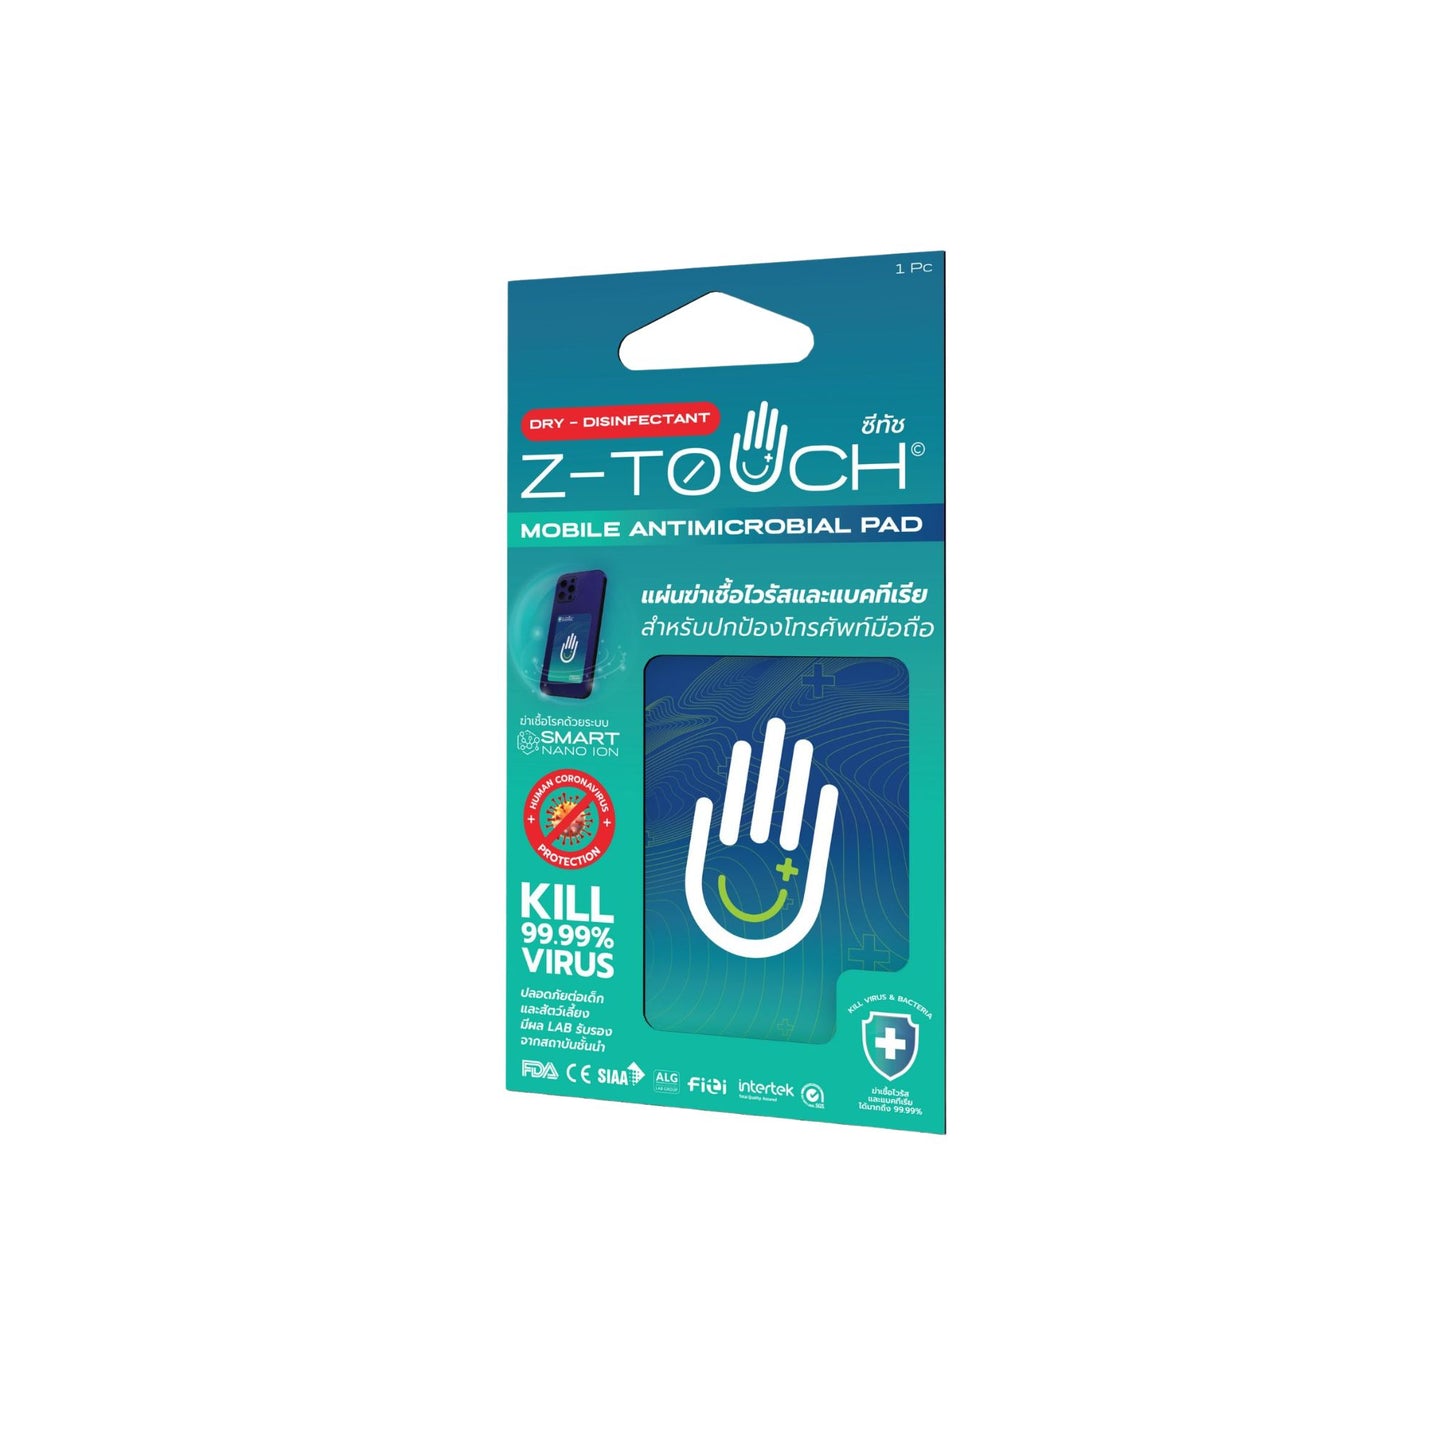 Z-Touch Mobile Phone Self-cleaning Antimicrobial Pad-Disinfection Sheet | Effectively kills germs and bacteria